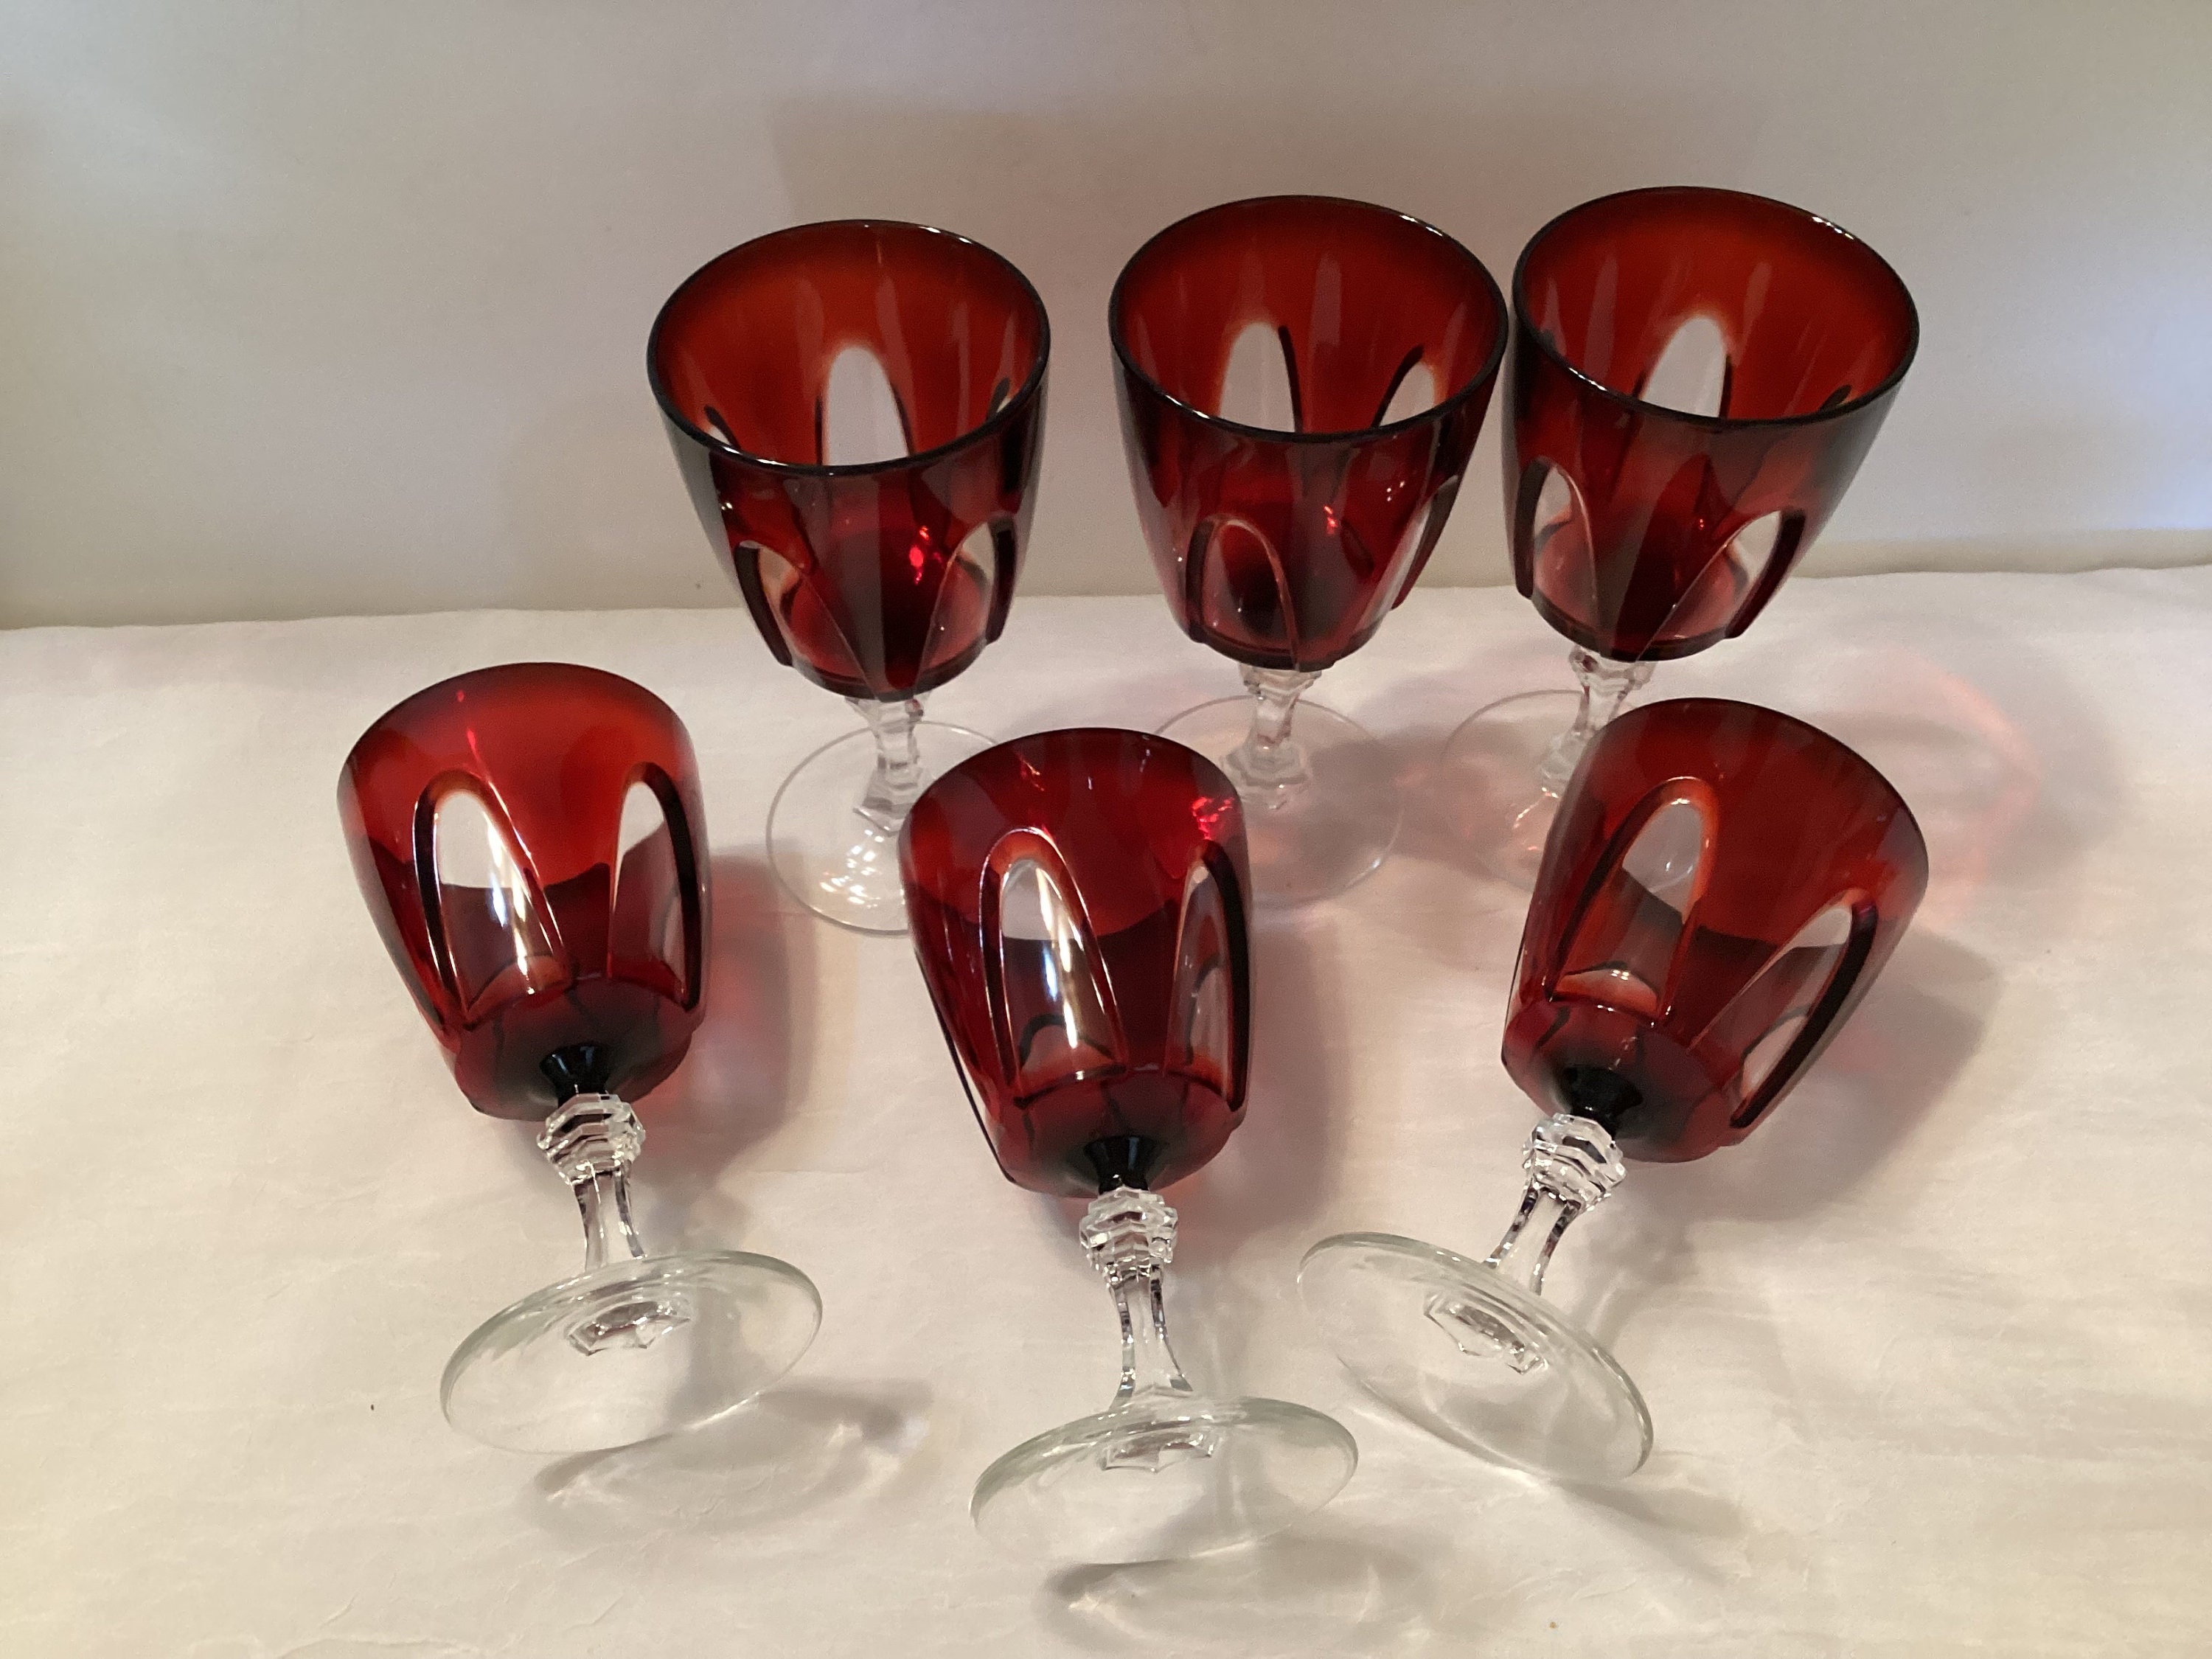 Red or White Wine Square Glasses With Stem set of 4 - 14oz Crystal Unique  Mod